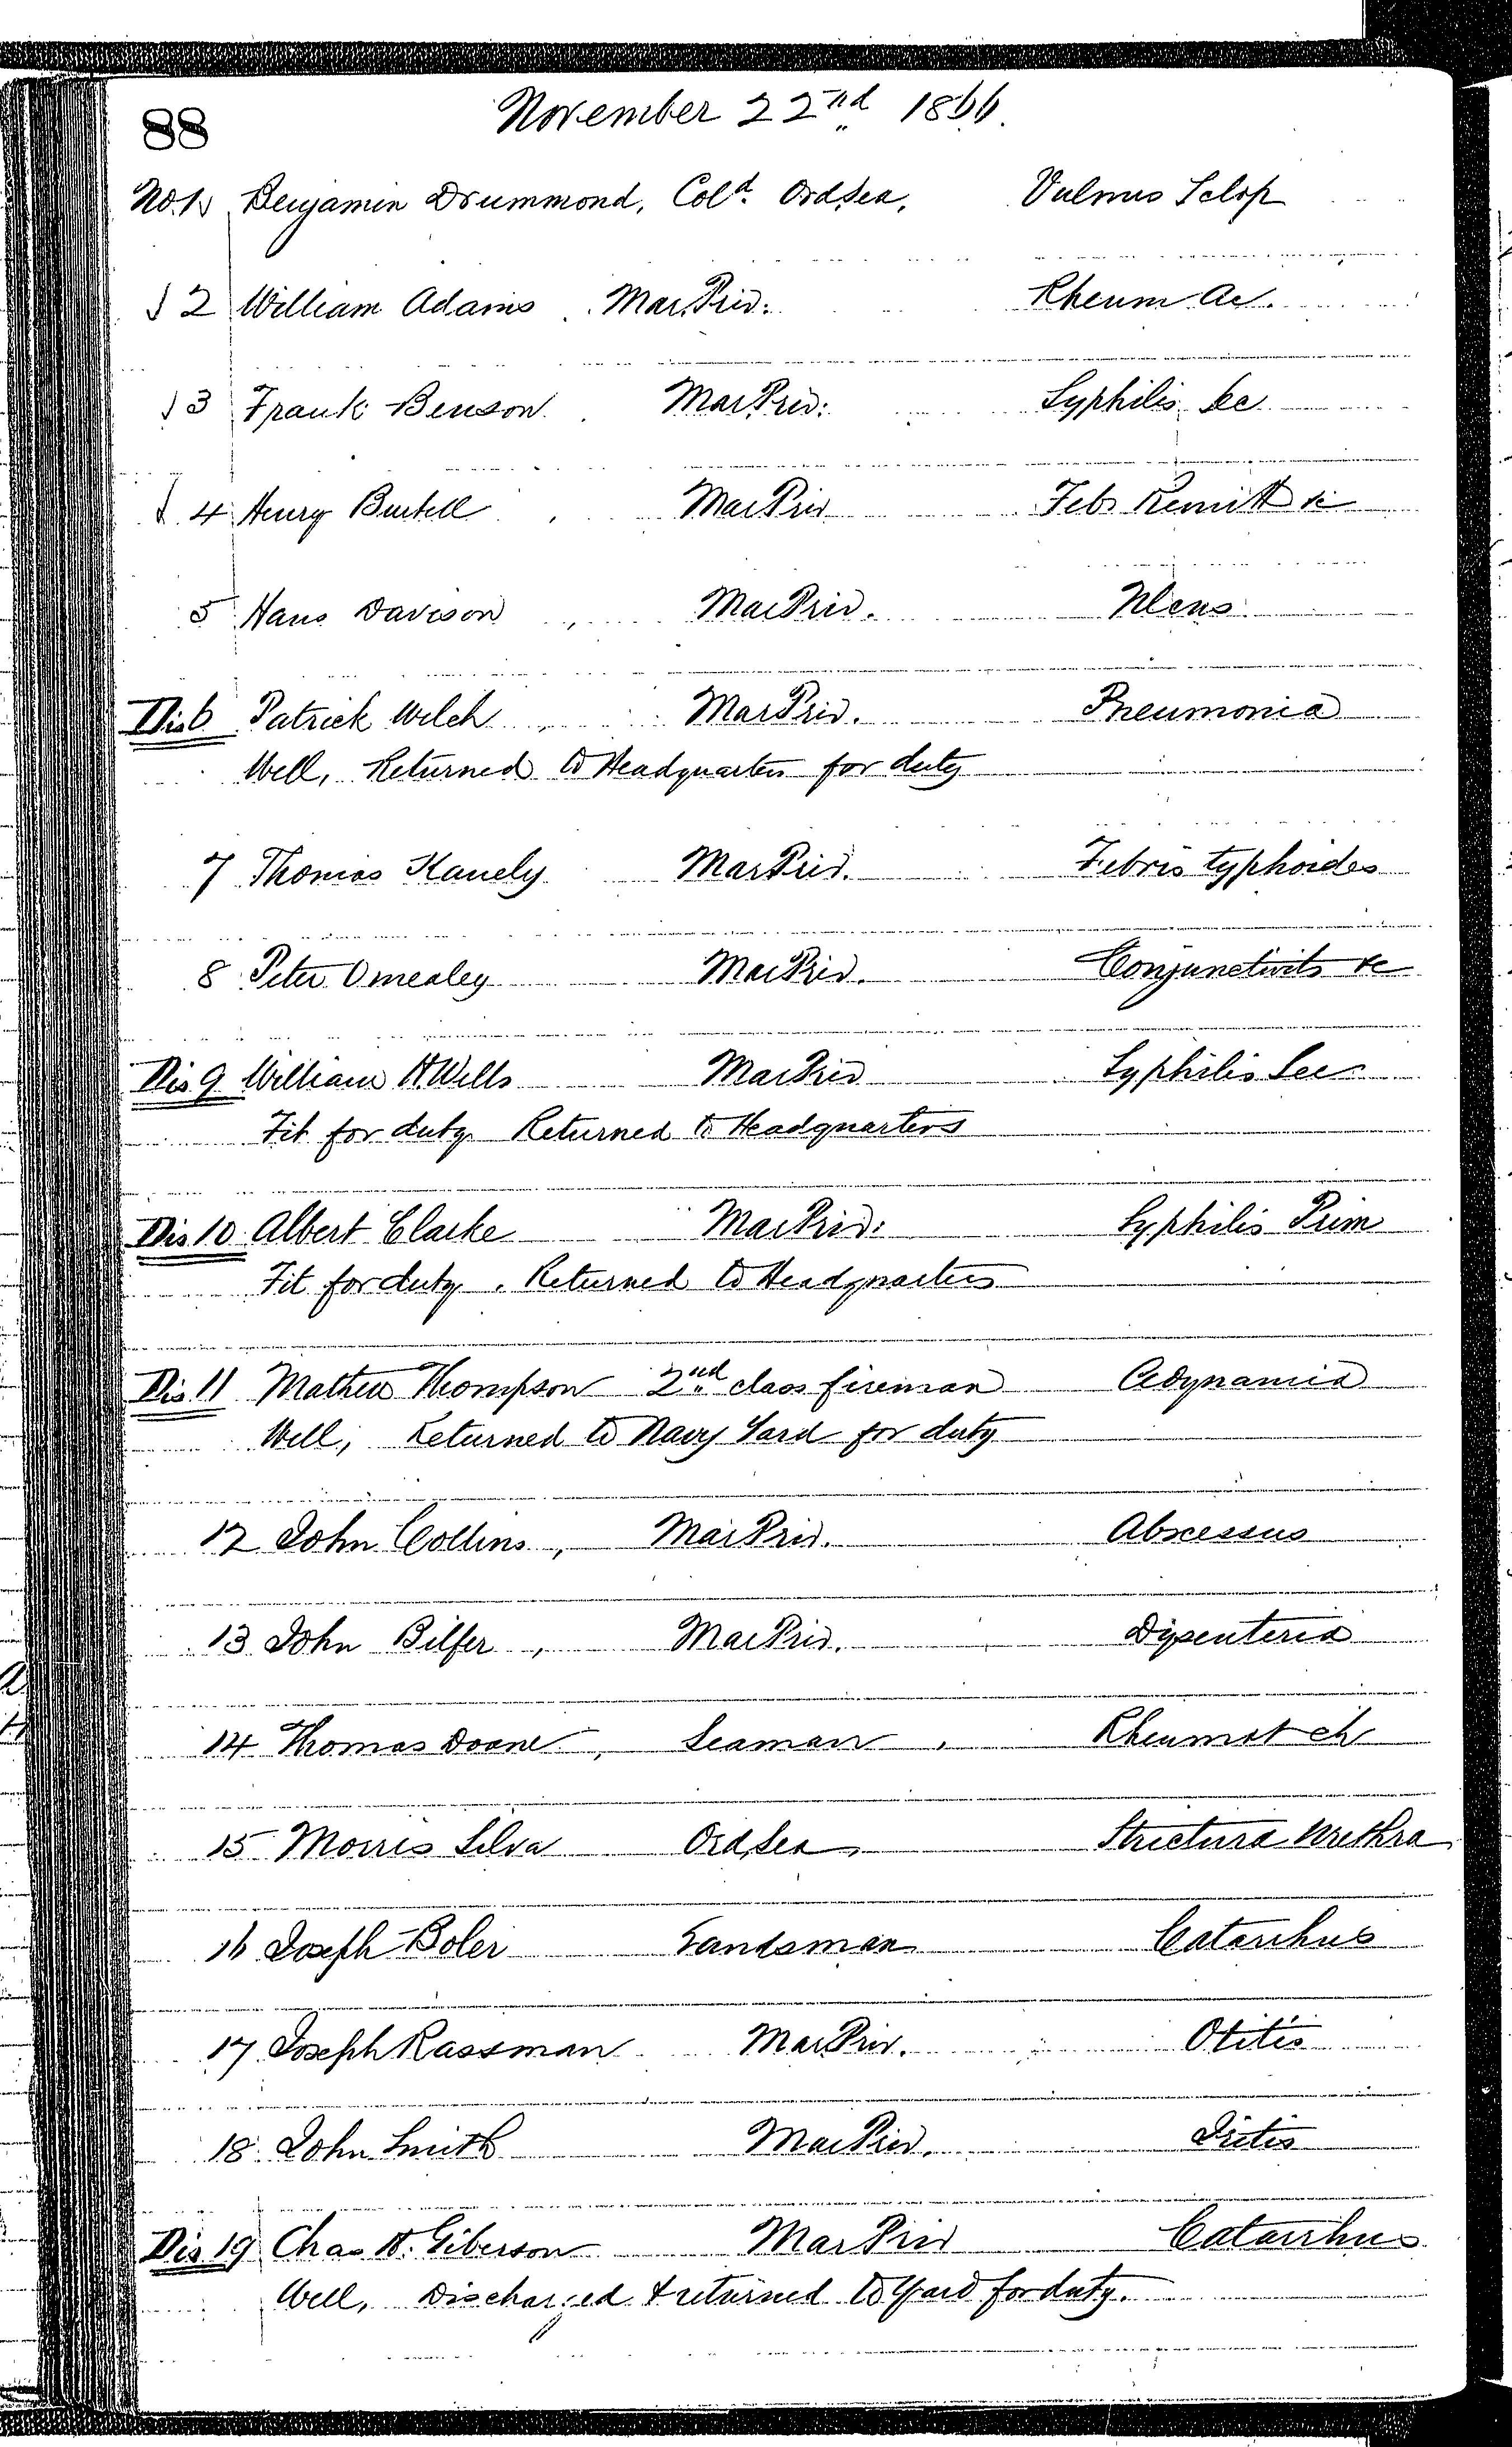 Patients in the Naval Hospital, Washington DC, on November 22, 1866, page 1 of 2, in the Medical Journal, October 1, 1866 to March 20, 1867